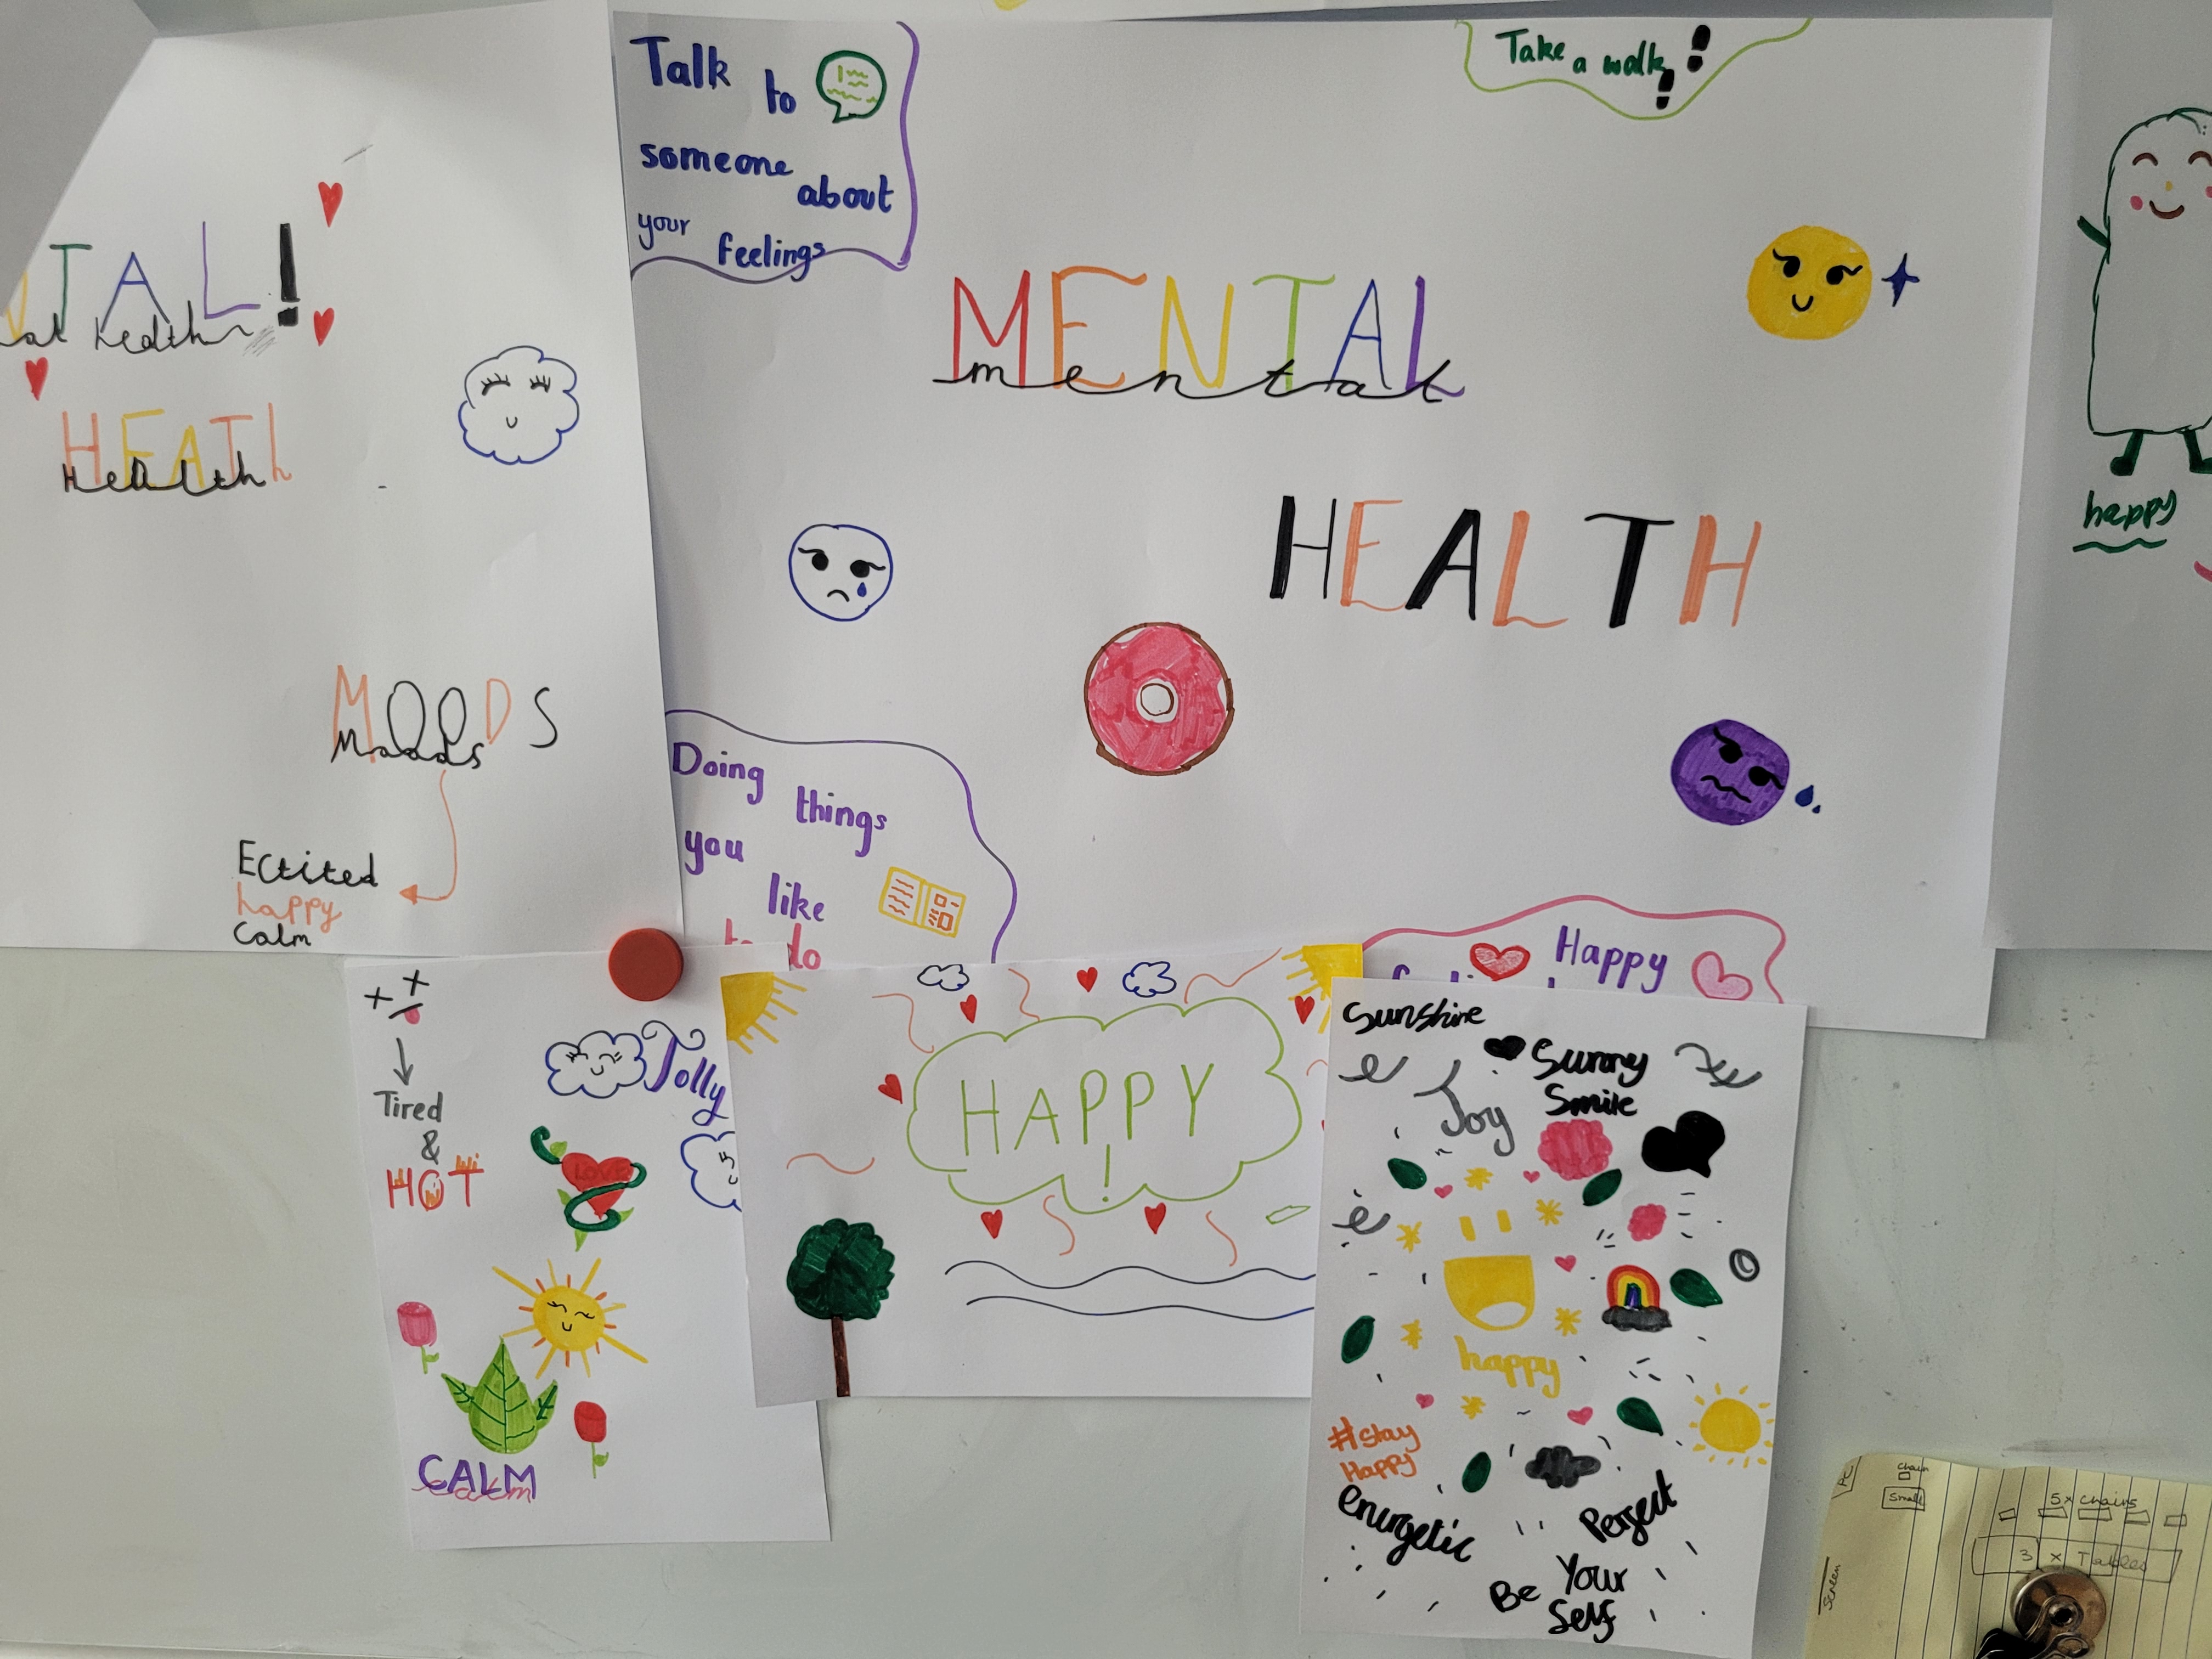 Children's drawings representing their feelings about mental health. Felt tip pen drawings on white paper showing pictures of trees, sunshine, hearts, smiling and unhappy emojis, clouds and rainbows accompanied by words like, mental health, calm, happy, joy, take a walk.